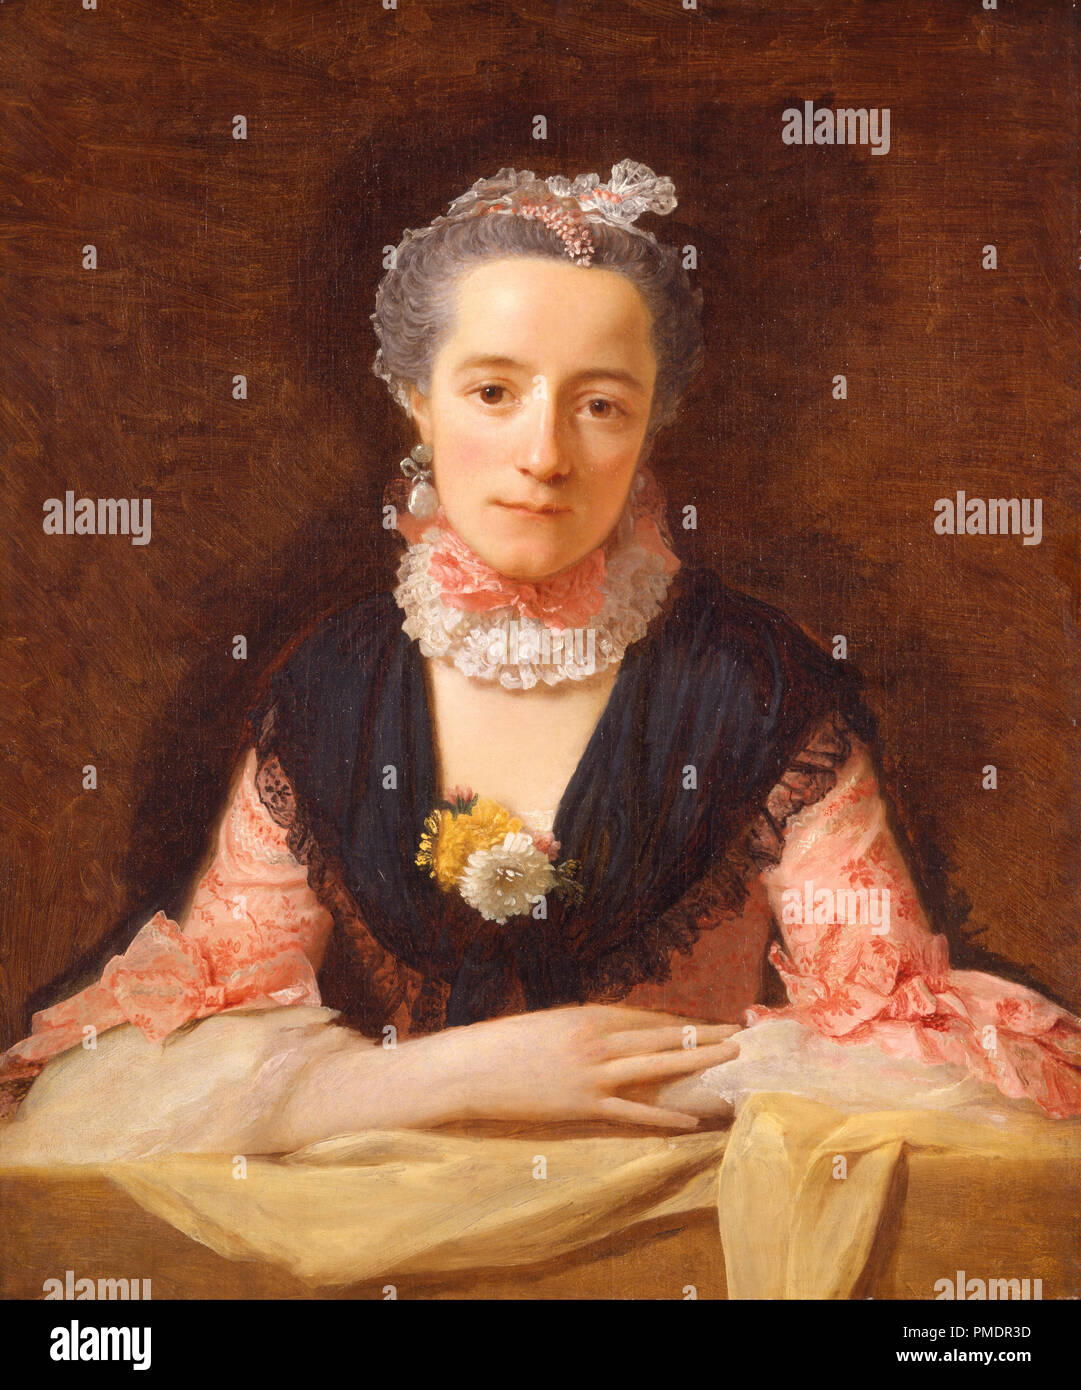 Lady in a Pink Silk Dress. Date/Period: Ca. 1762. Painting. Oil on canvas. Height: 762 mm (30 in); Width: 640 mm (25.19 in). Author: Allan Ramsay. Stock Photo